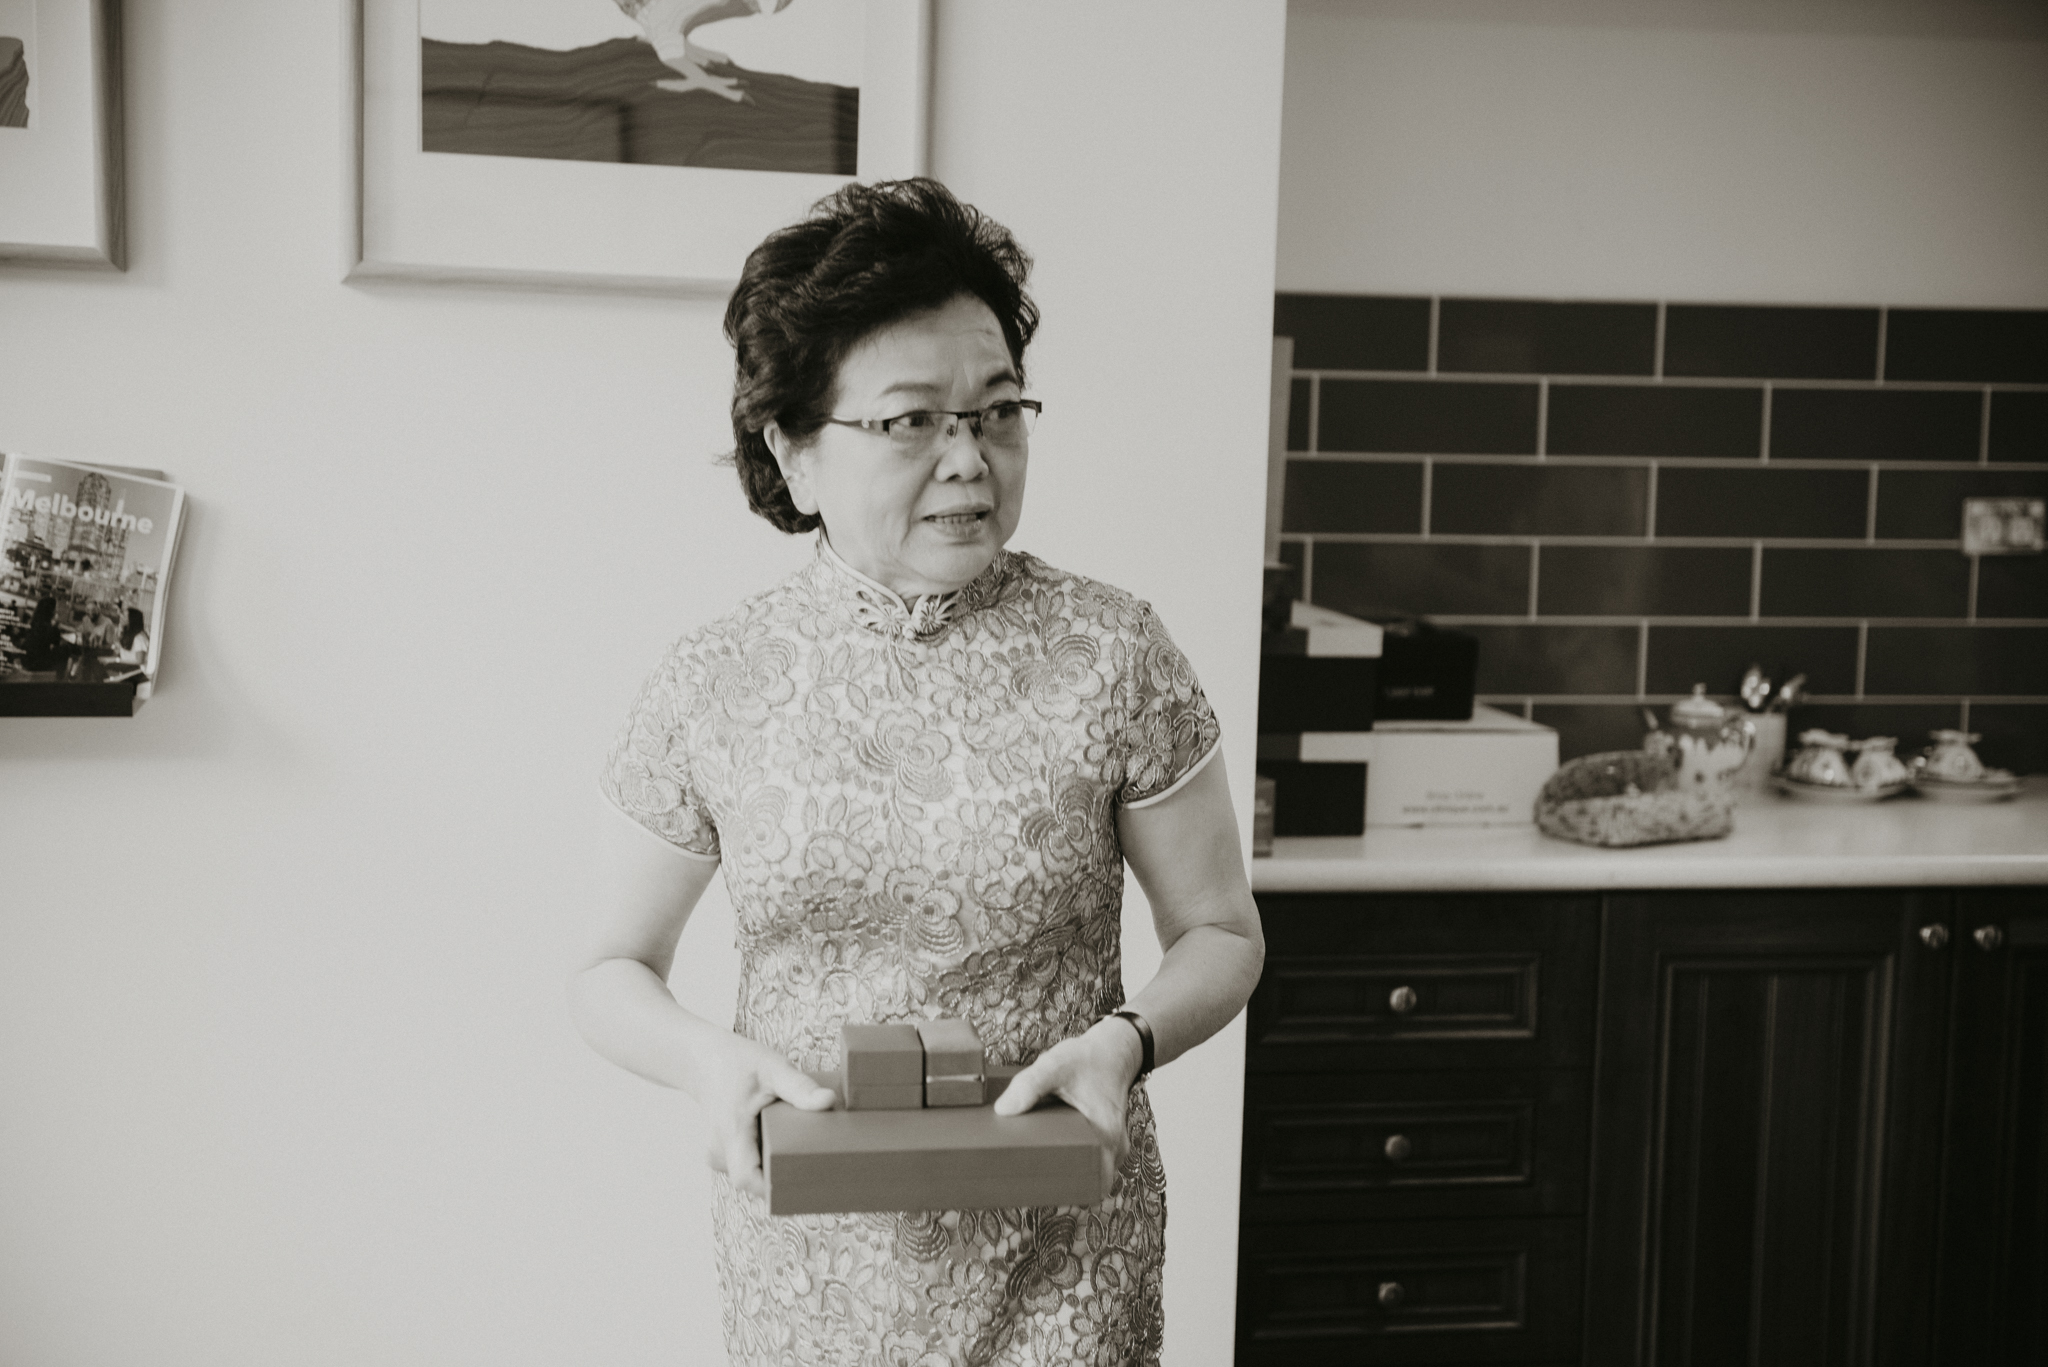 agnes-duy-15th-december-2018-chinese-vietnamese-wedding-tea-ceremony-yarraville-home-house-documentary-candid-photographer-sarah-matler-photography-24